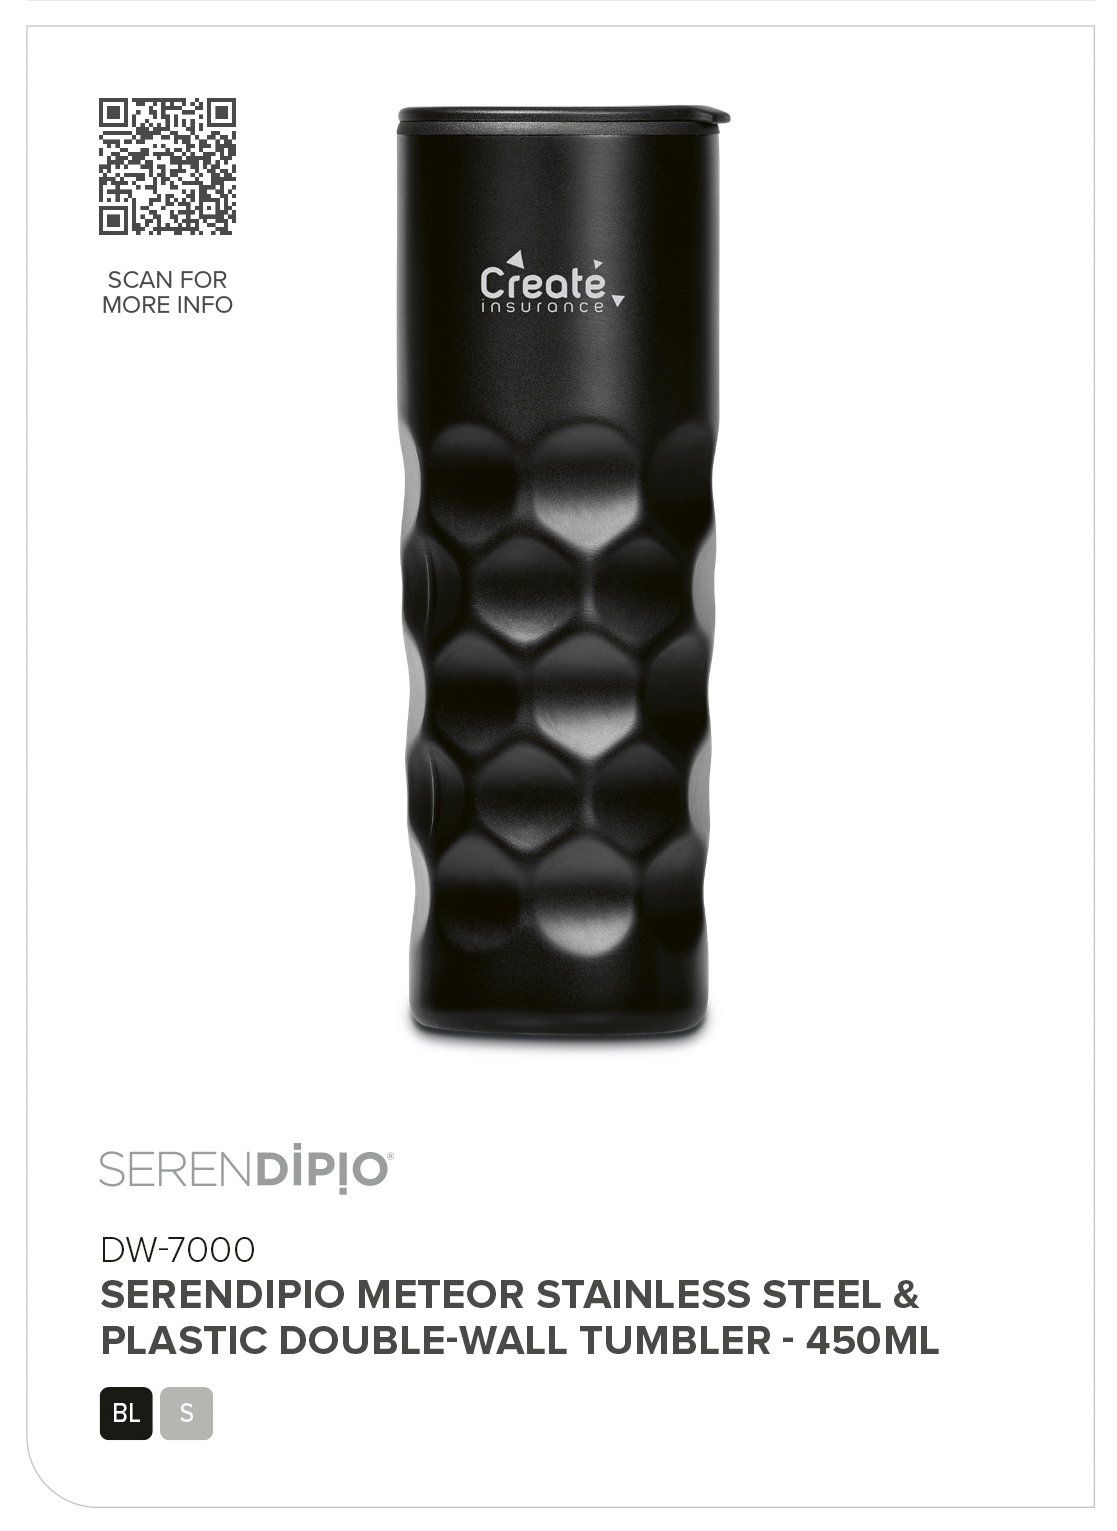 Serendipio Meteor Stainless Steel & Plastic Double-Wall Tumbler - 450ml CATALOGUE_IMAGE